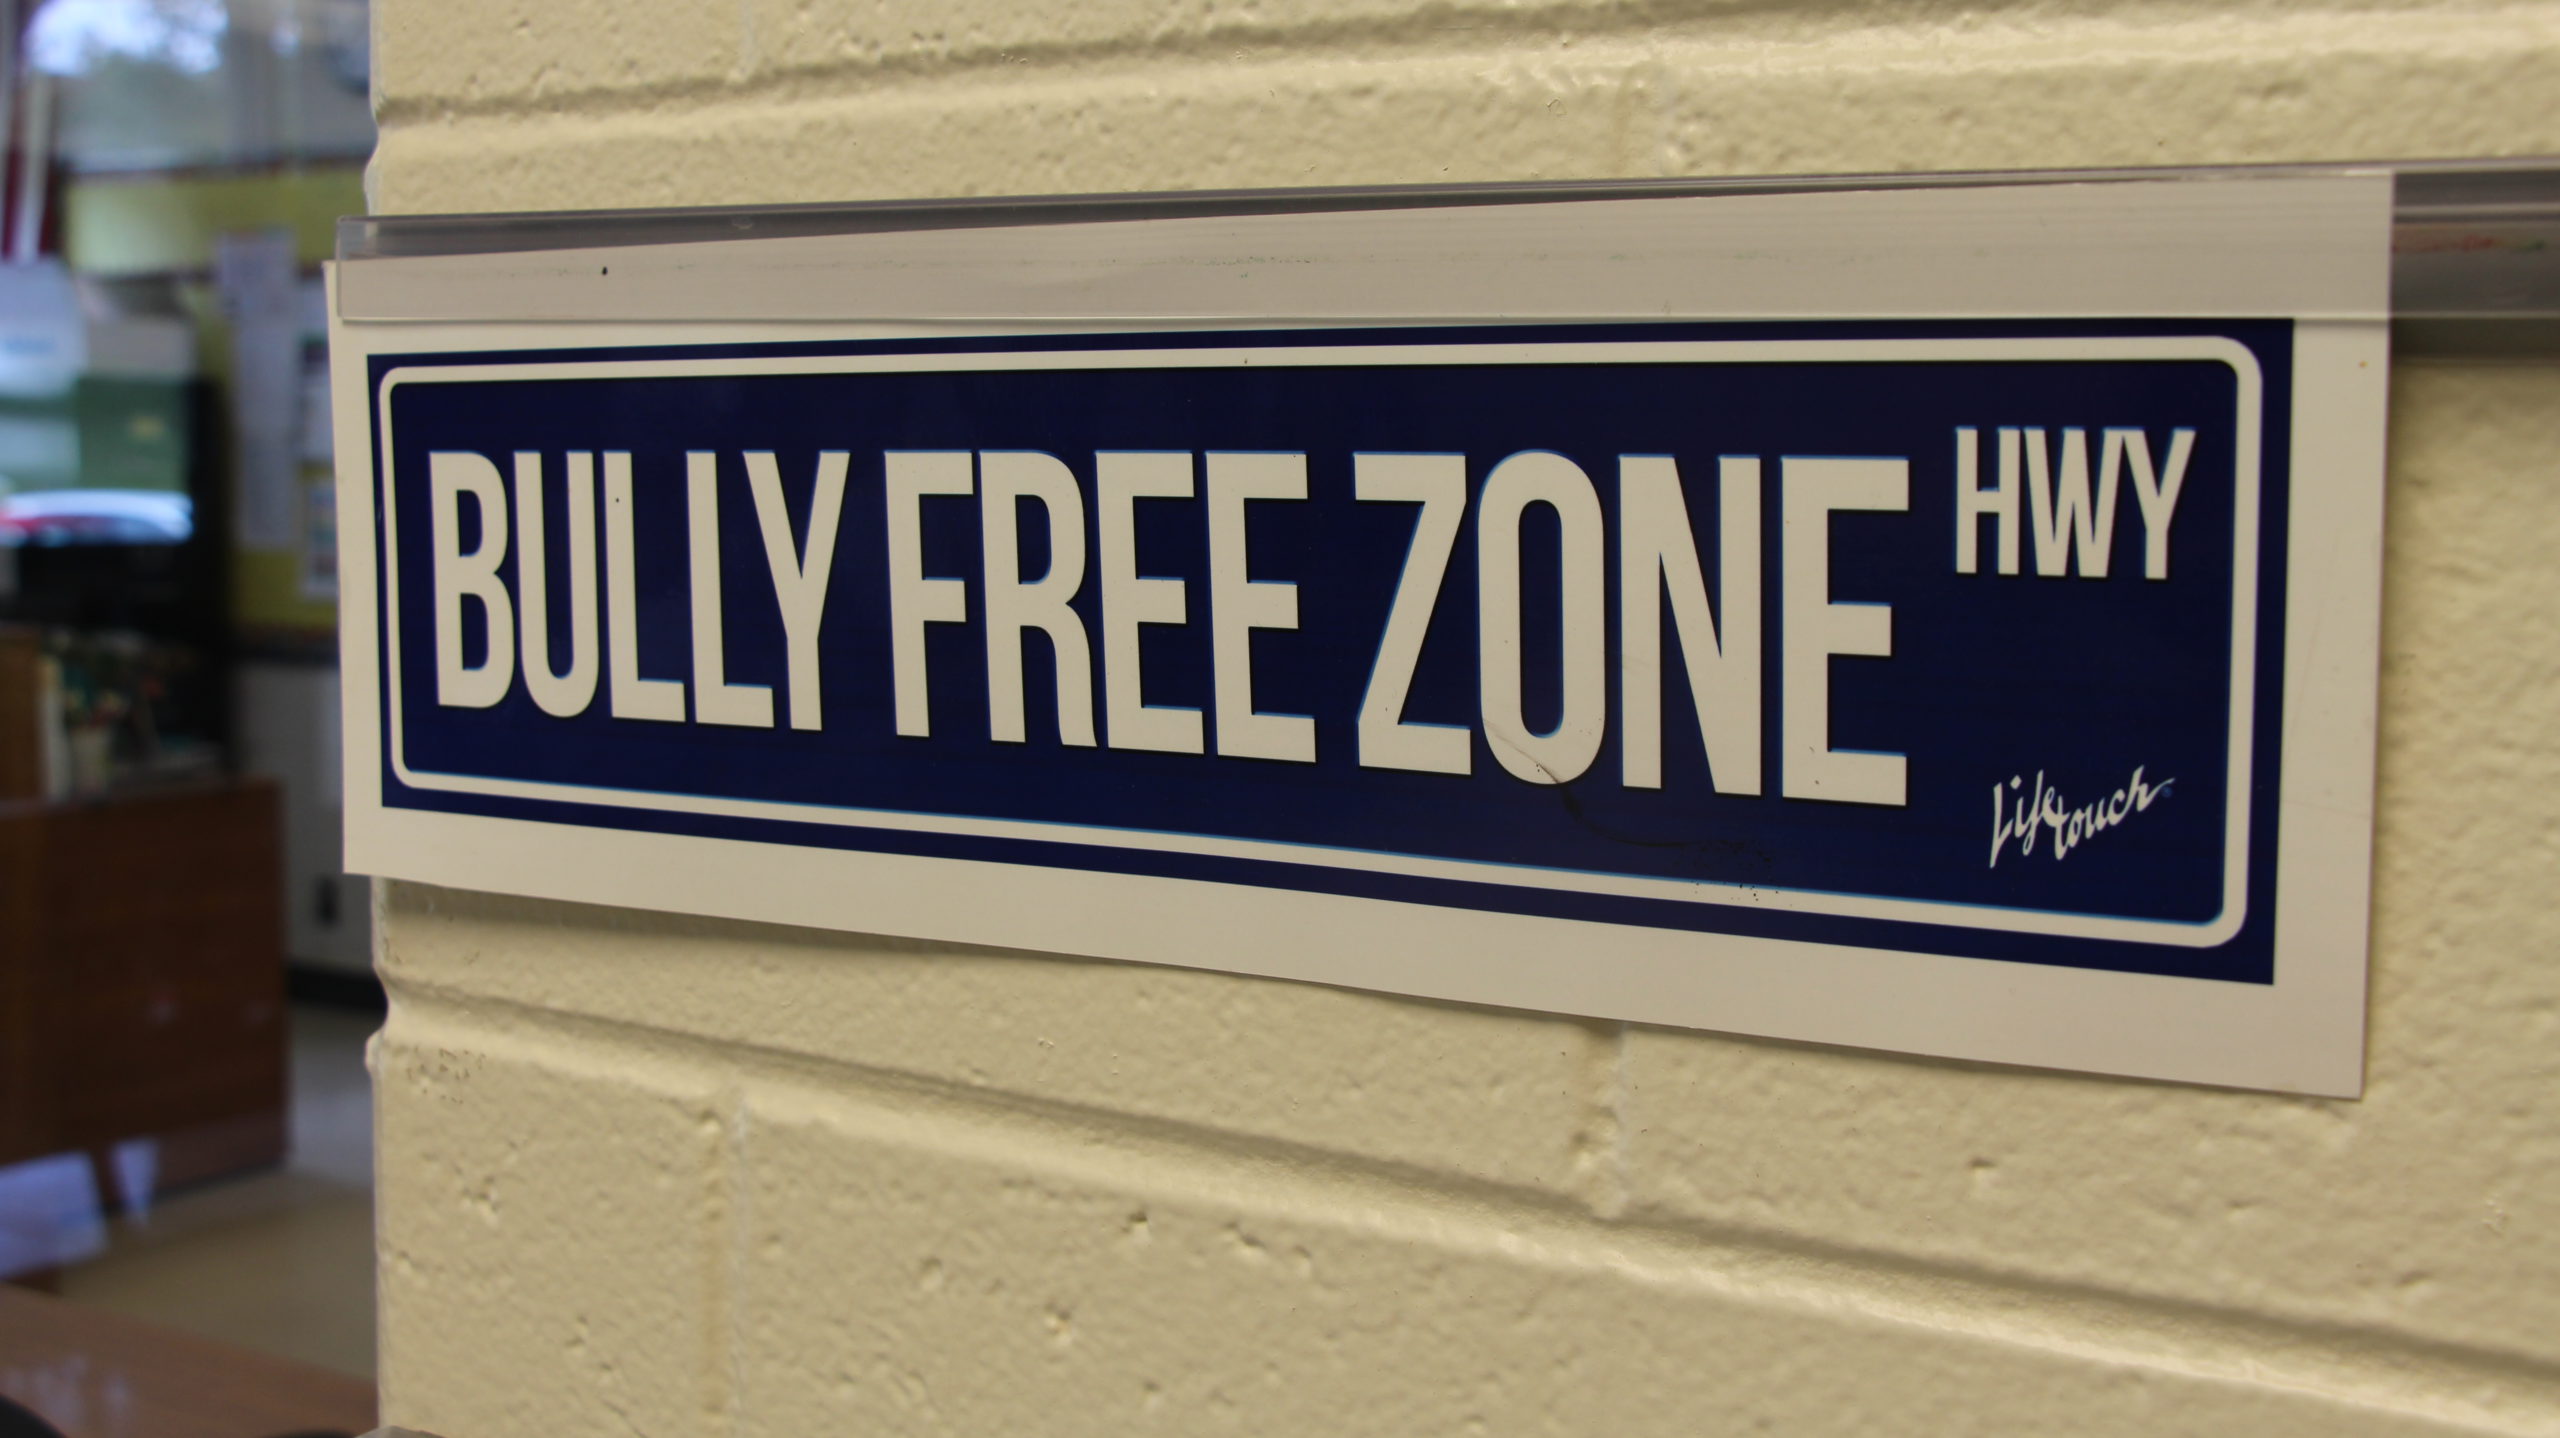 Signs such as "Bully Free Zone HWY" were displayed at C.R. Weeks Elementary School of Windsor Central School District.